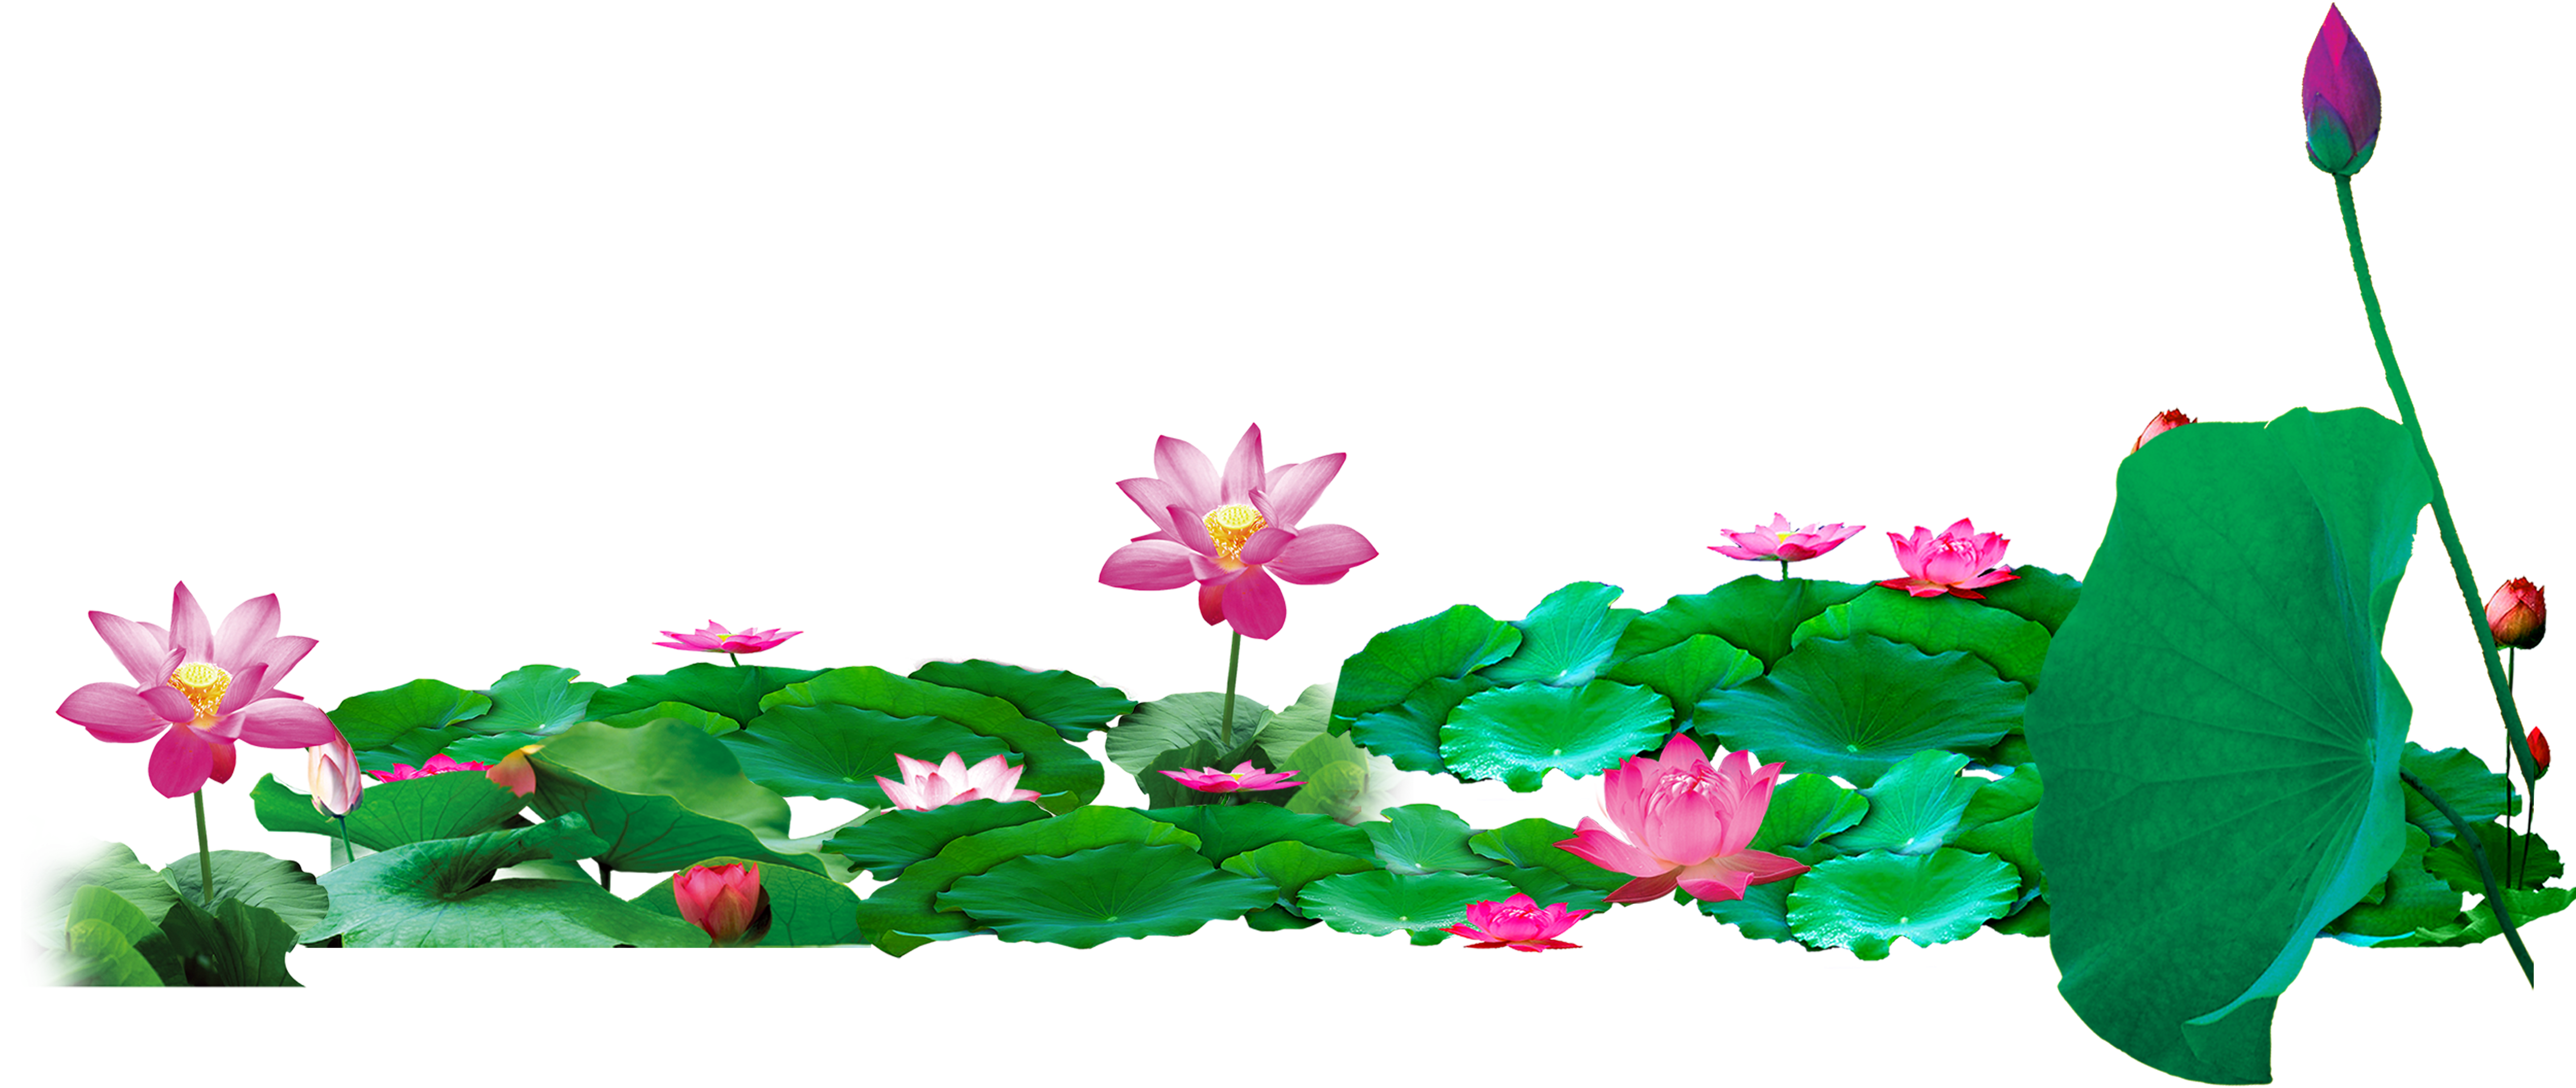 Lotus Background PNG Image | PNG Play